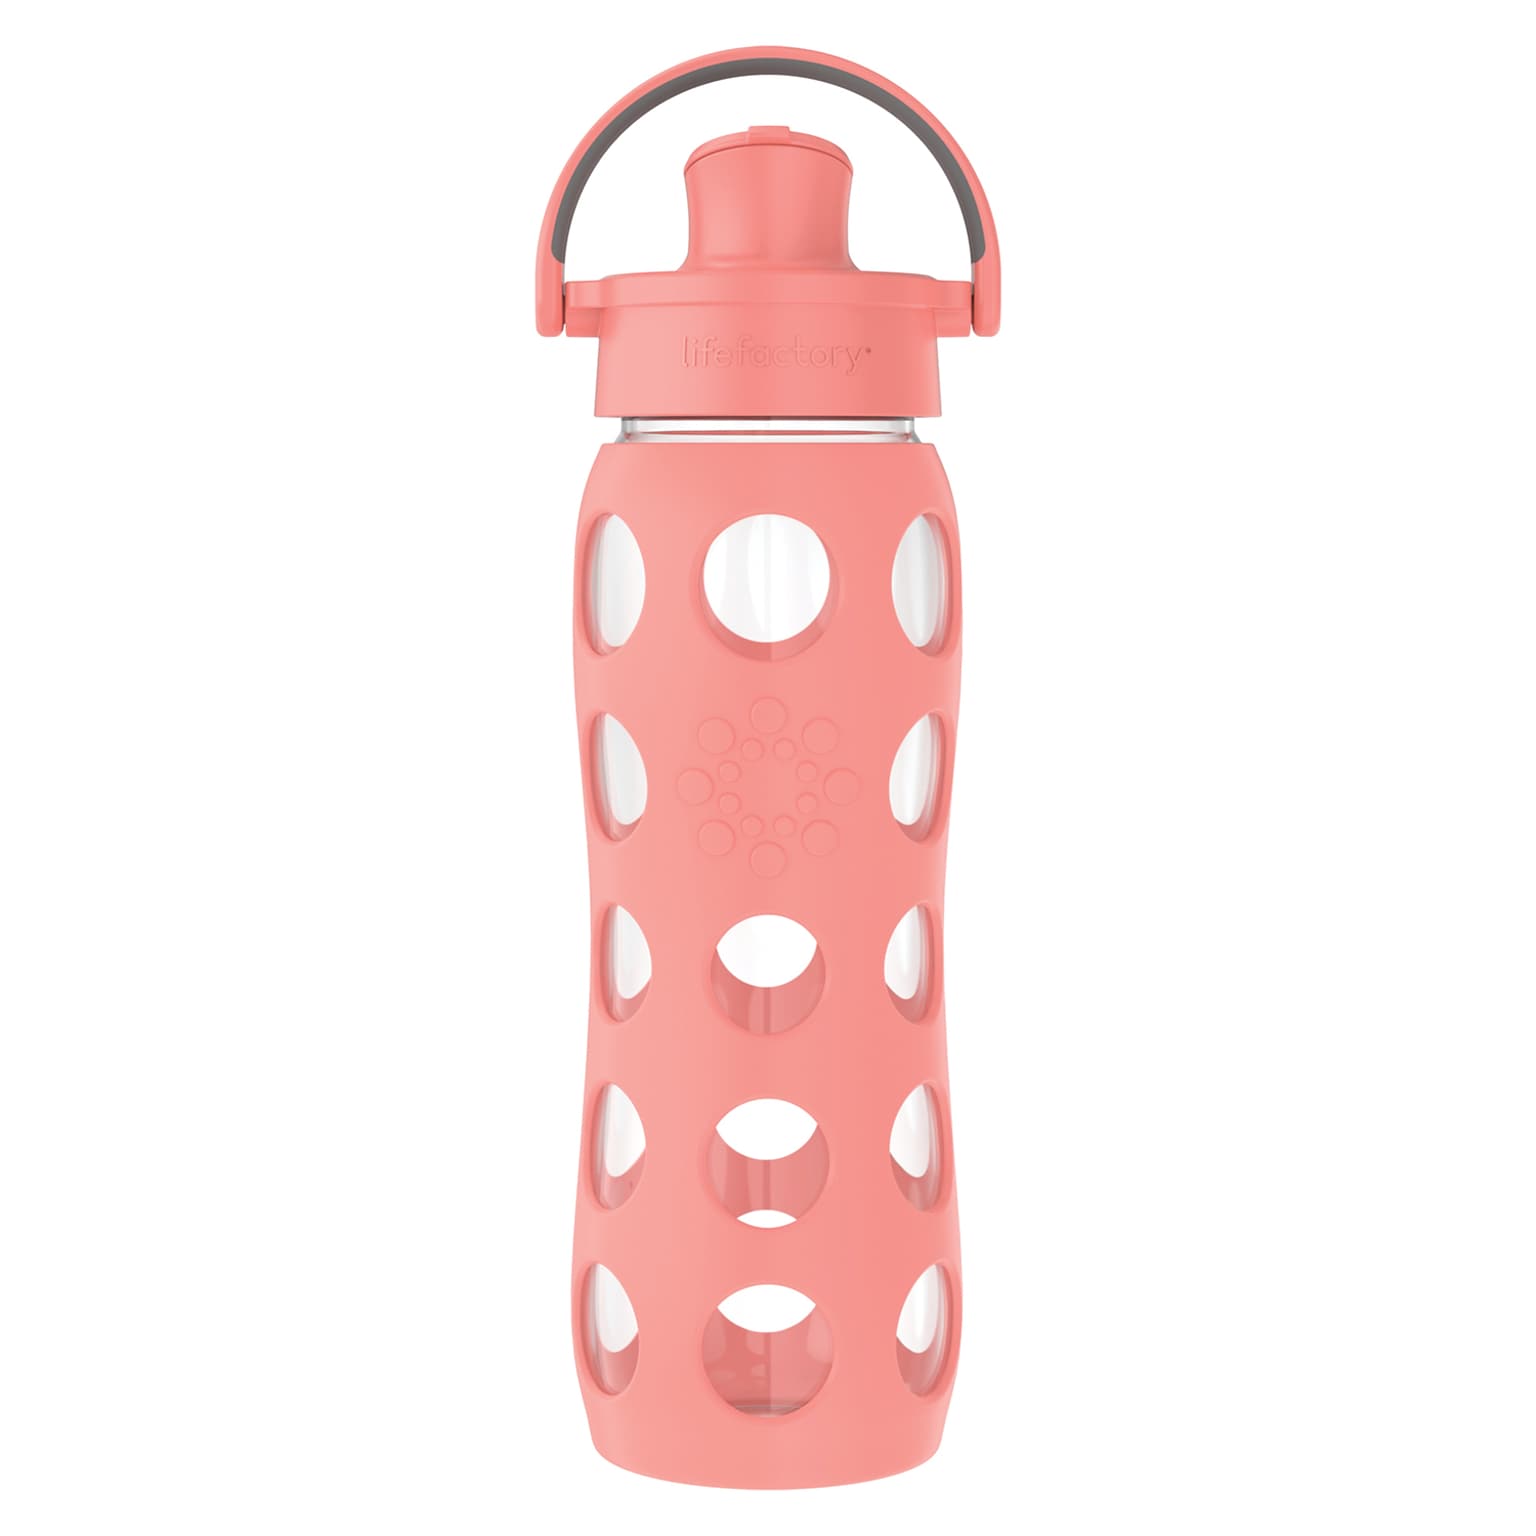 Lifefactory Water Bottle with Active Flip Cap and Protective Silicone Sleeve, Cantaloupe, 22 oz. (LG4321MCA4)